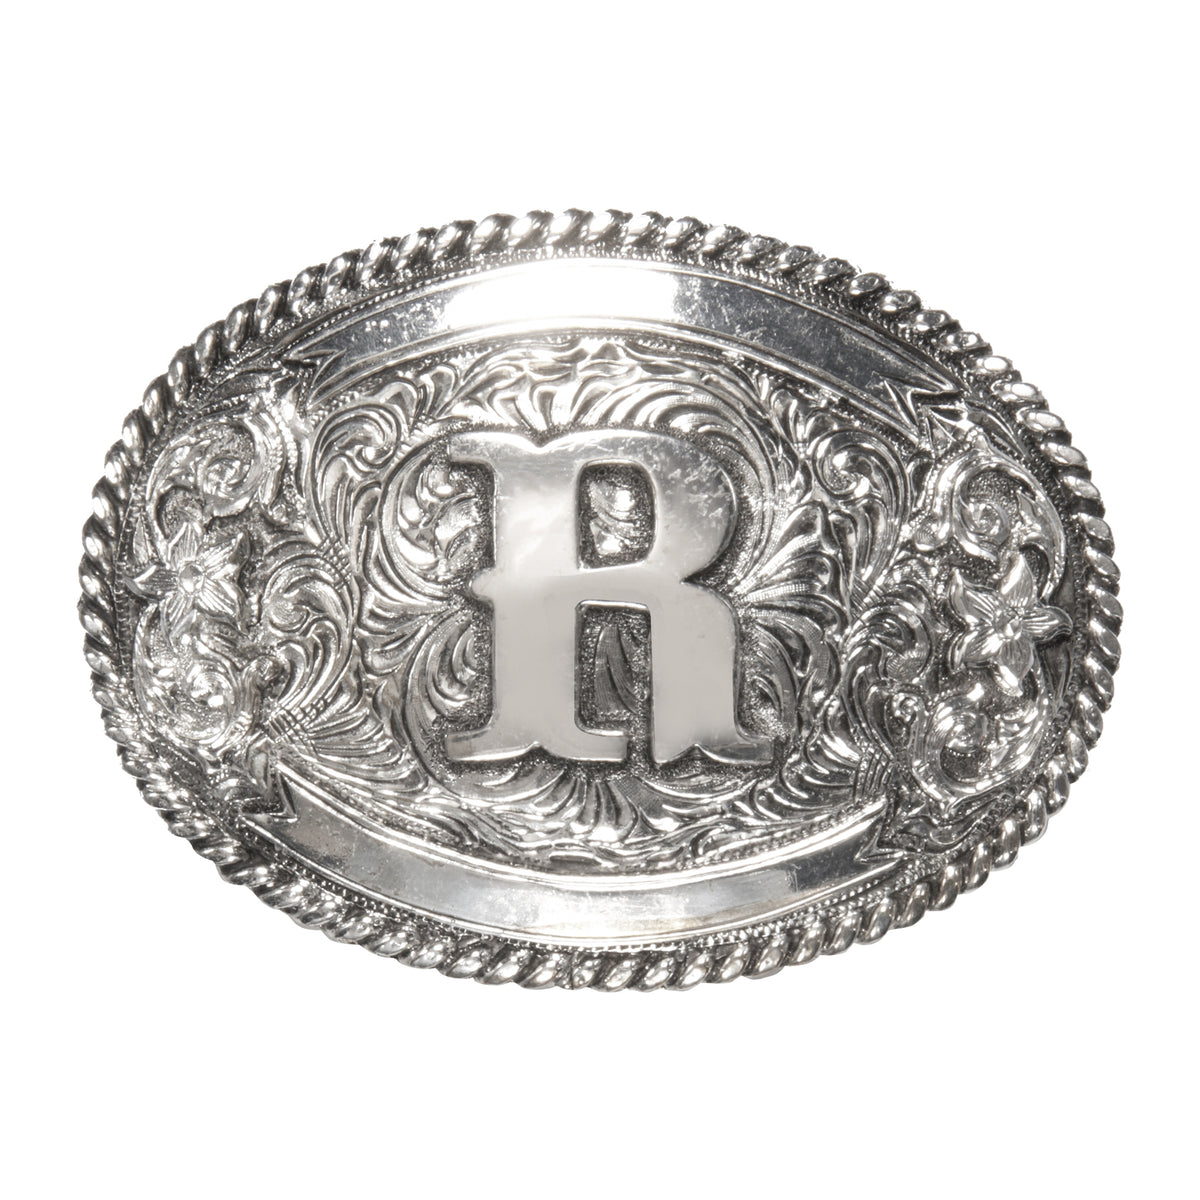 Initial “R” Buckle